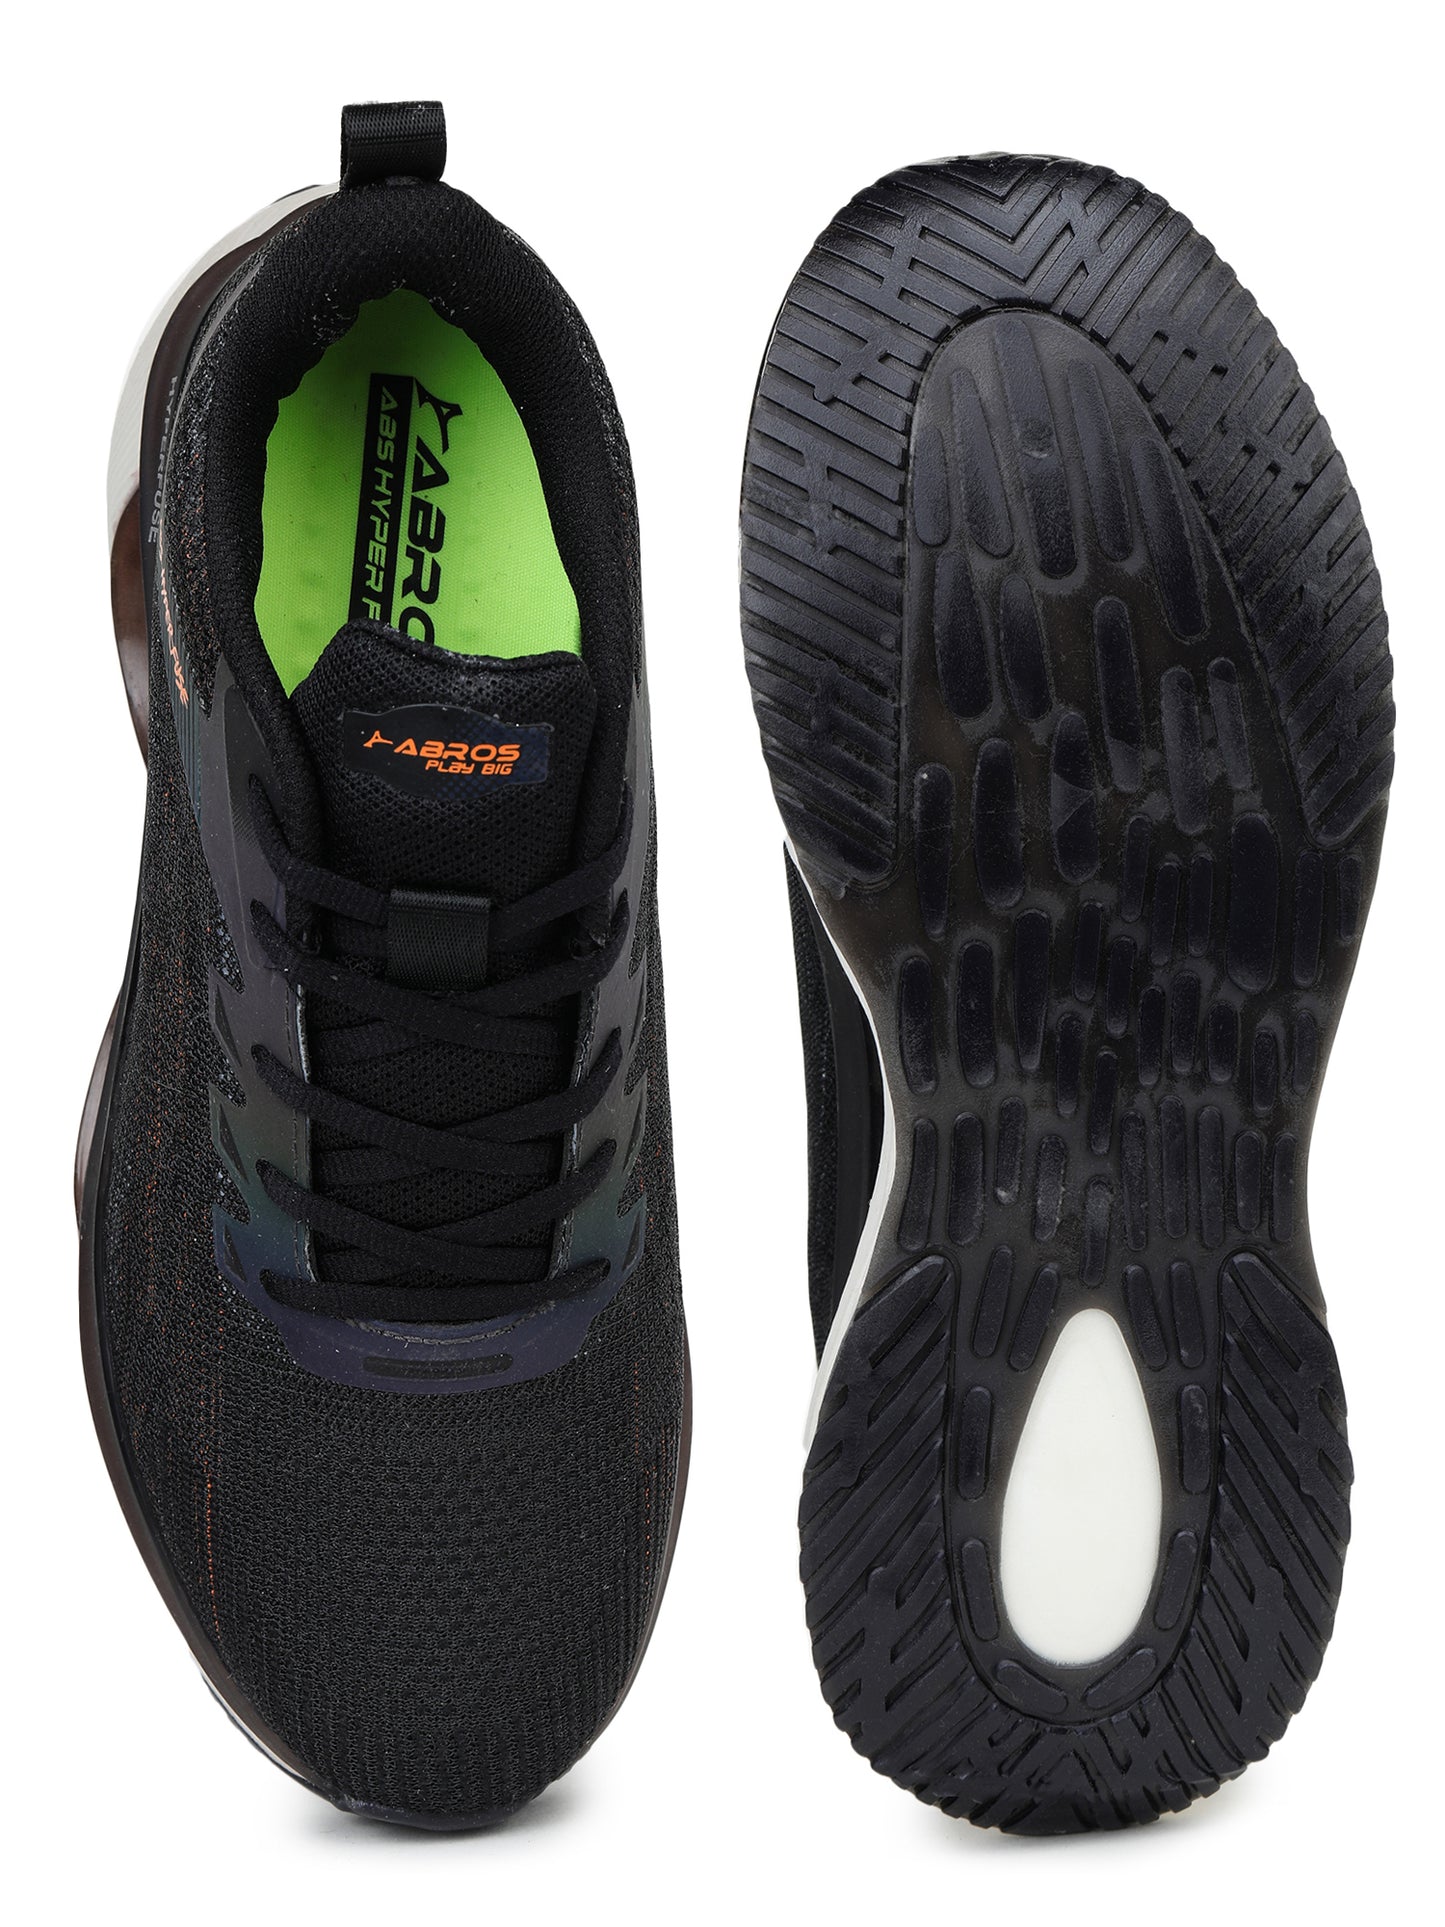 ABROS TERRENCE Sports shoes For Men's